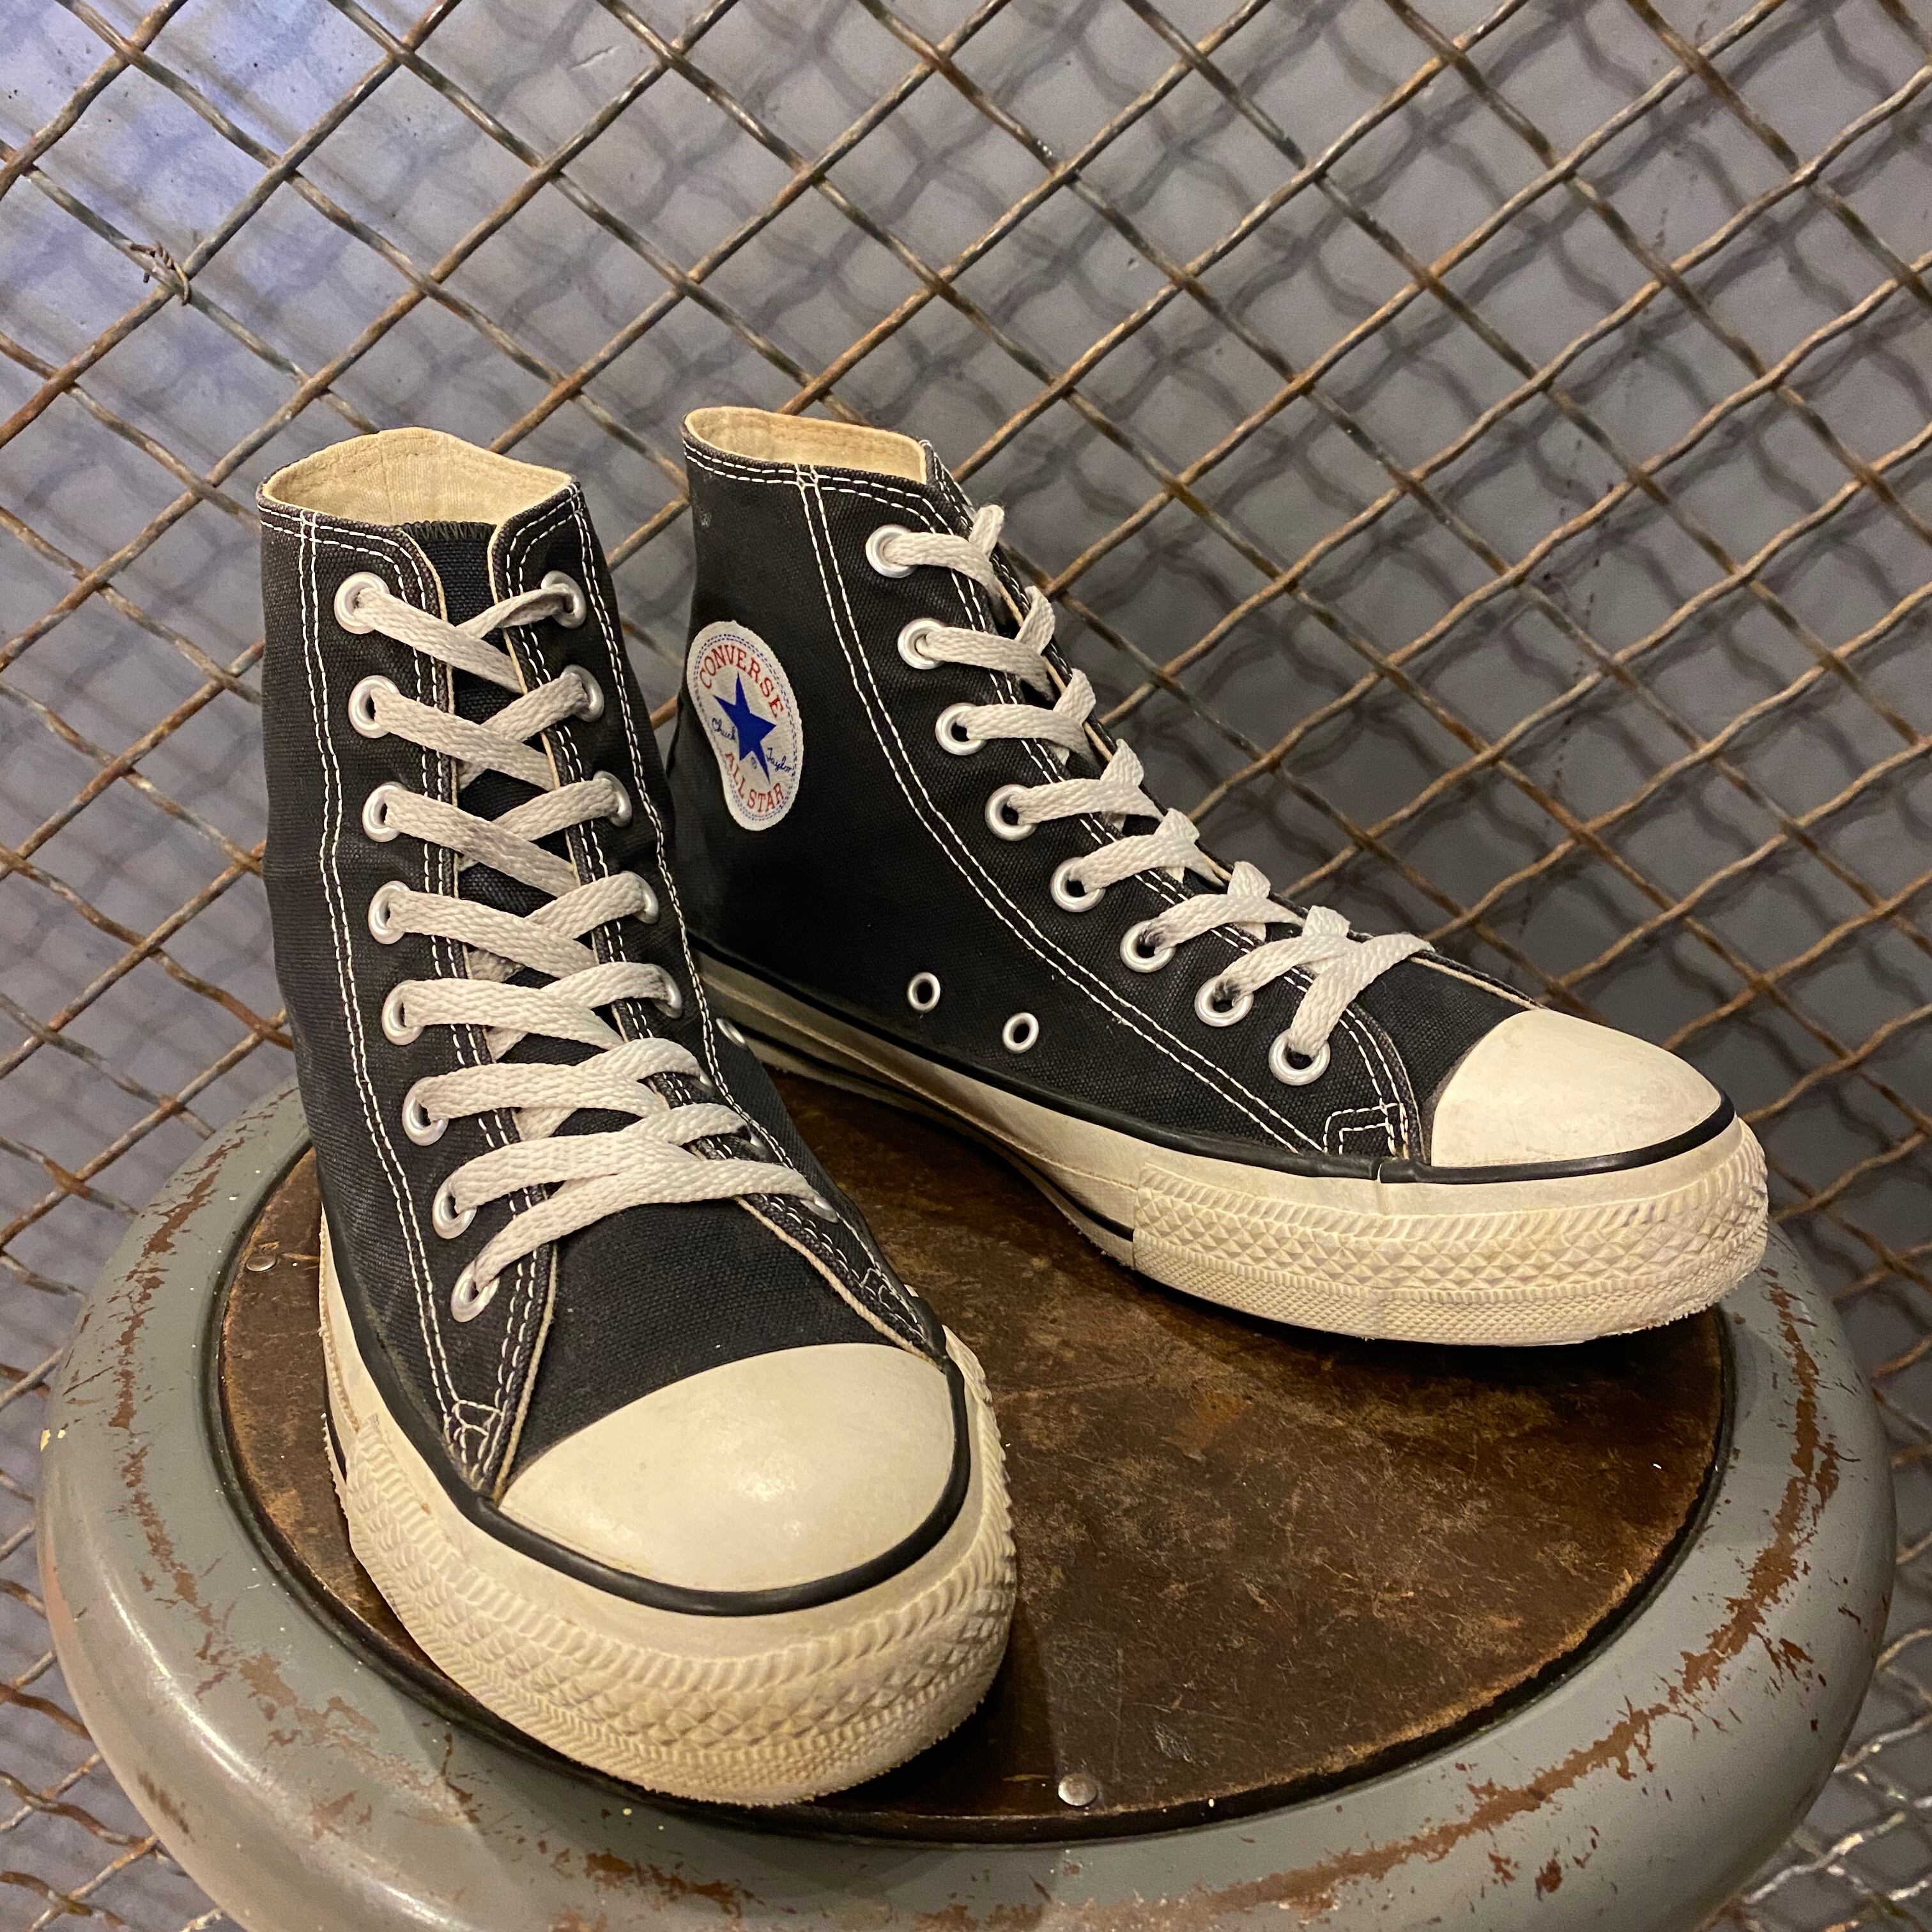 80s 90s converse all star レオパード USA製 - 靴